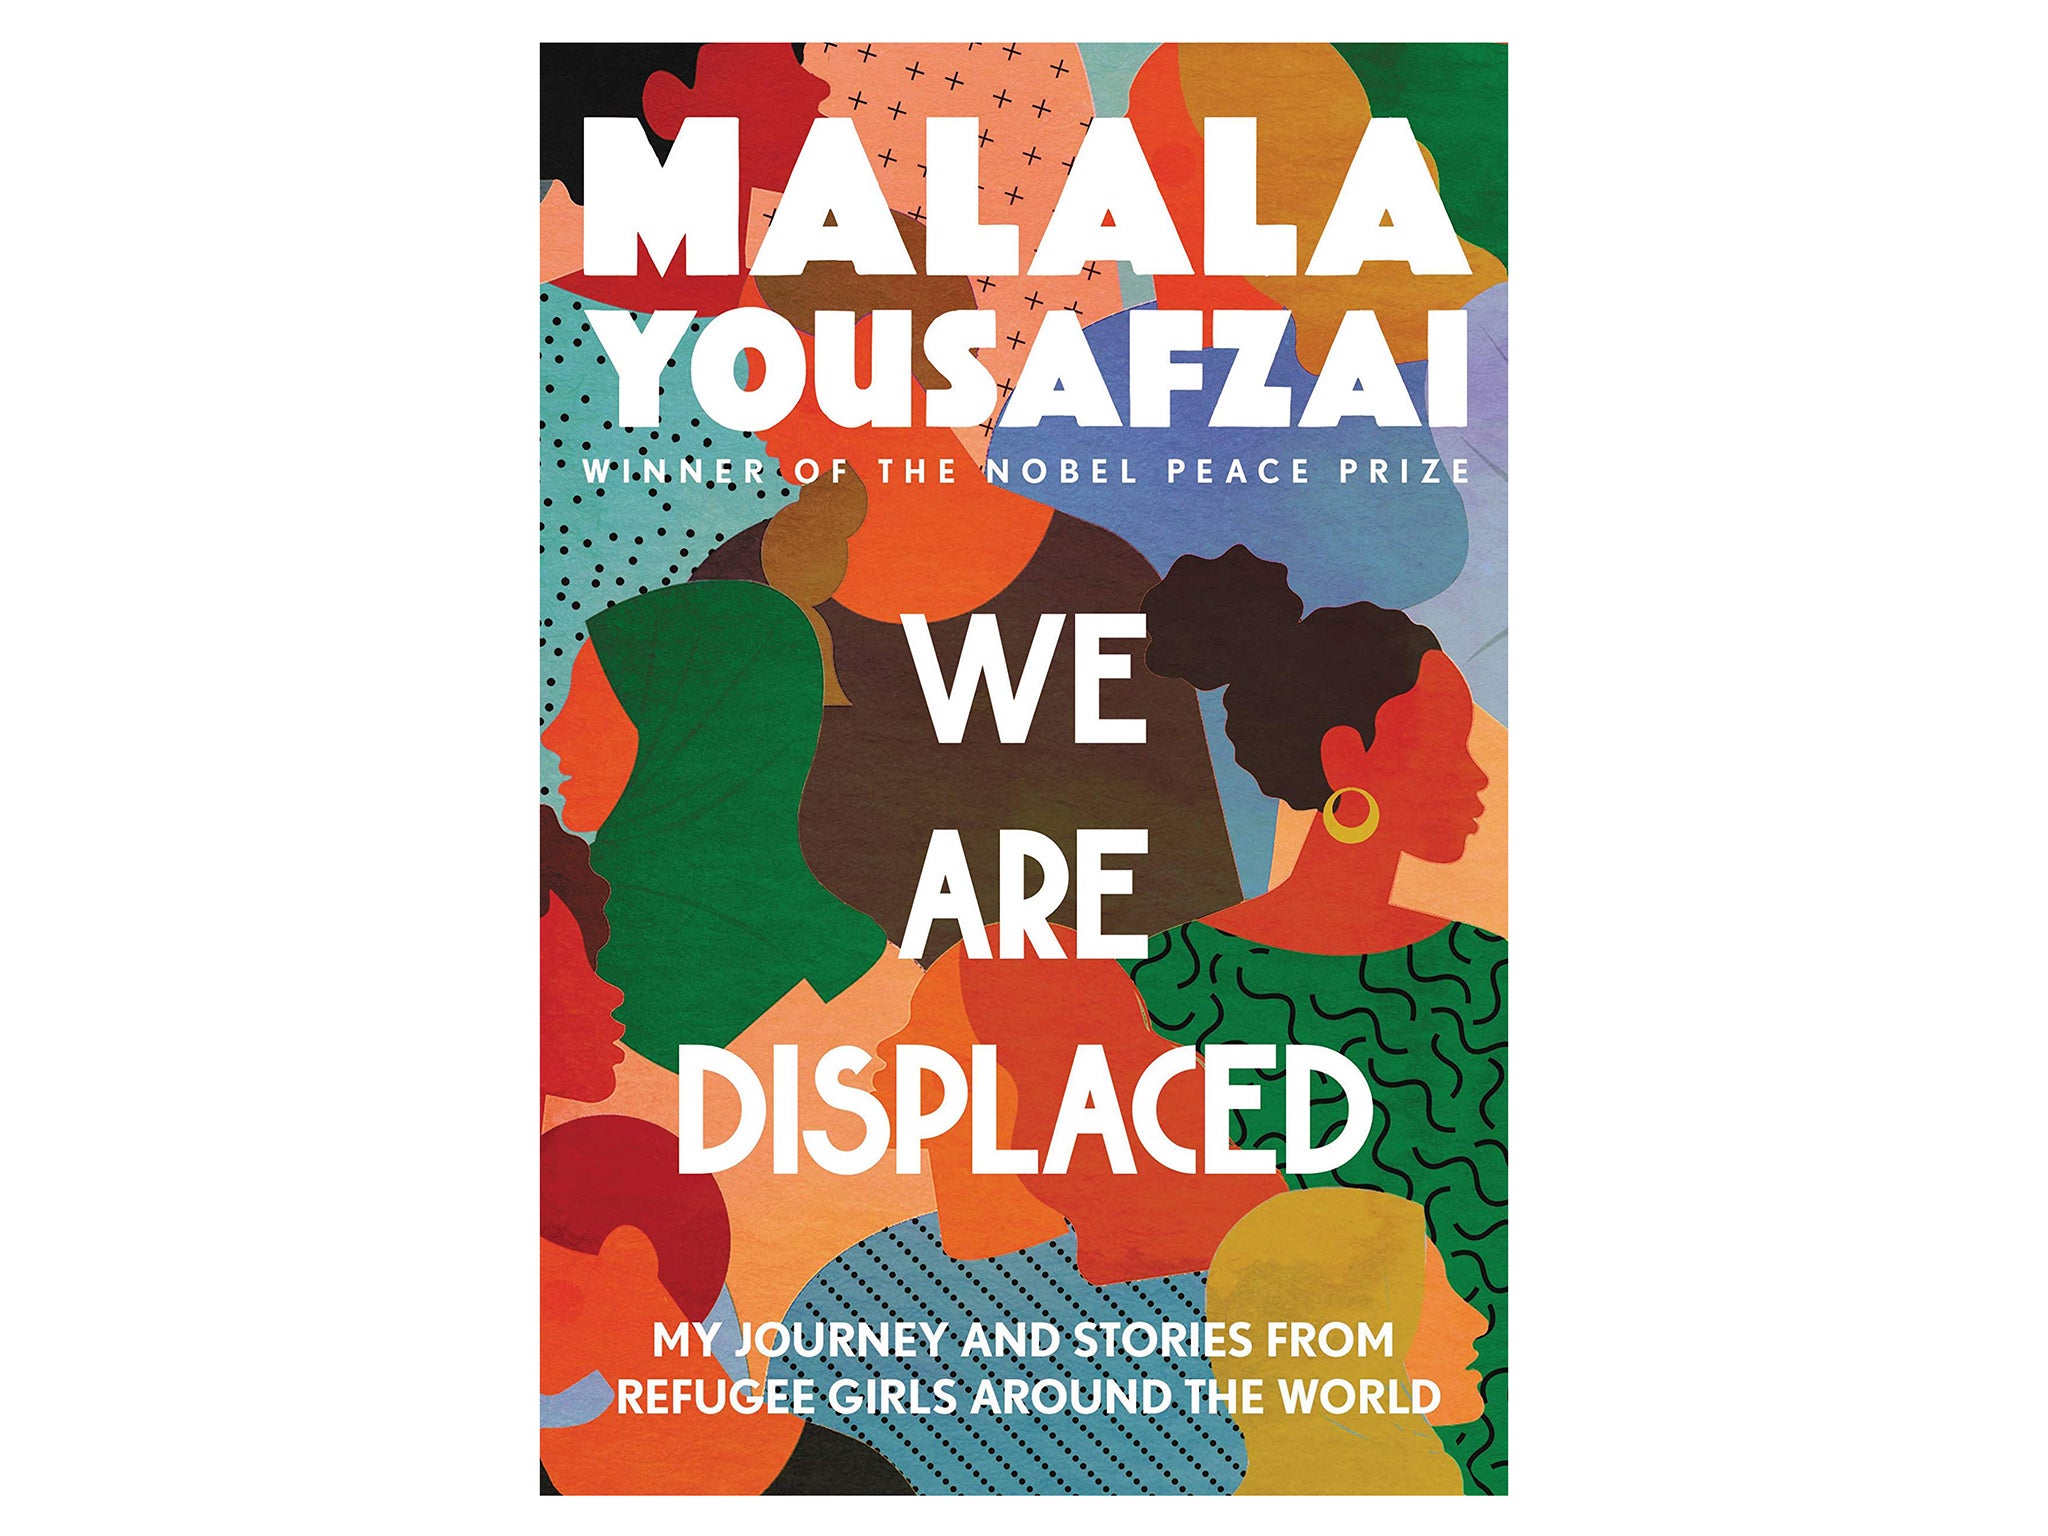 we-are-displaced-malala-indybest.jpeg